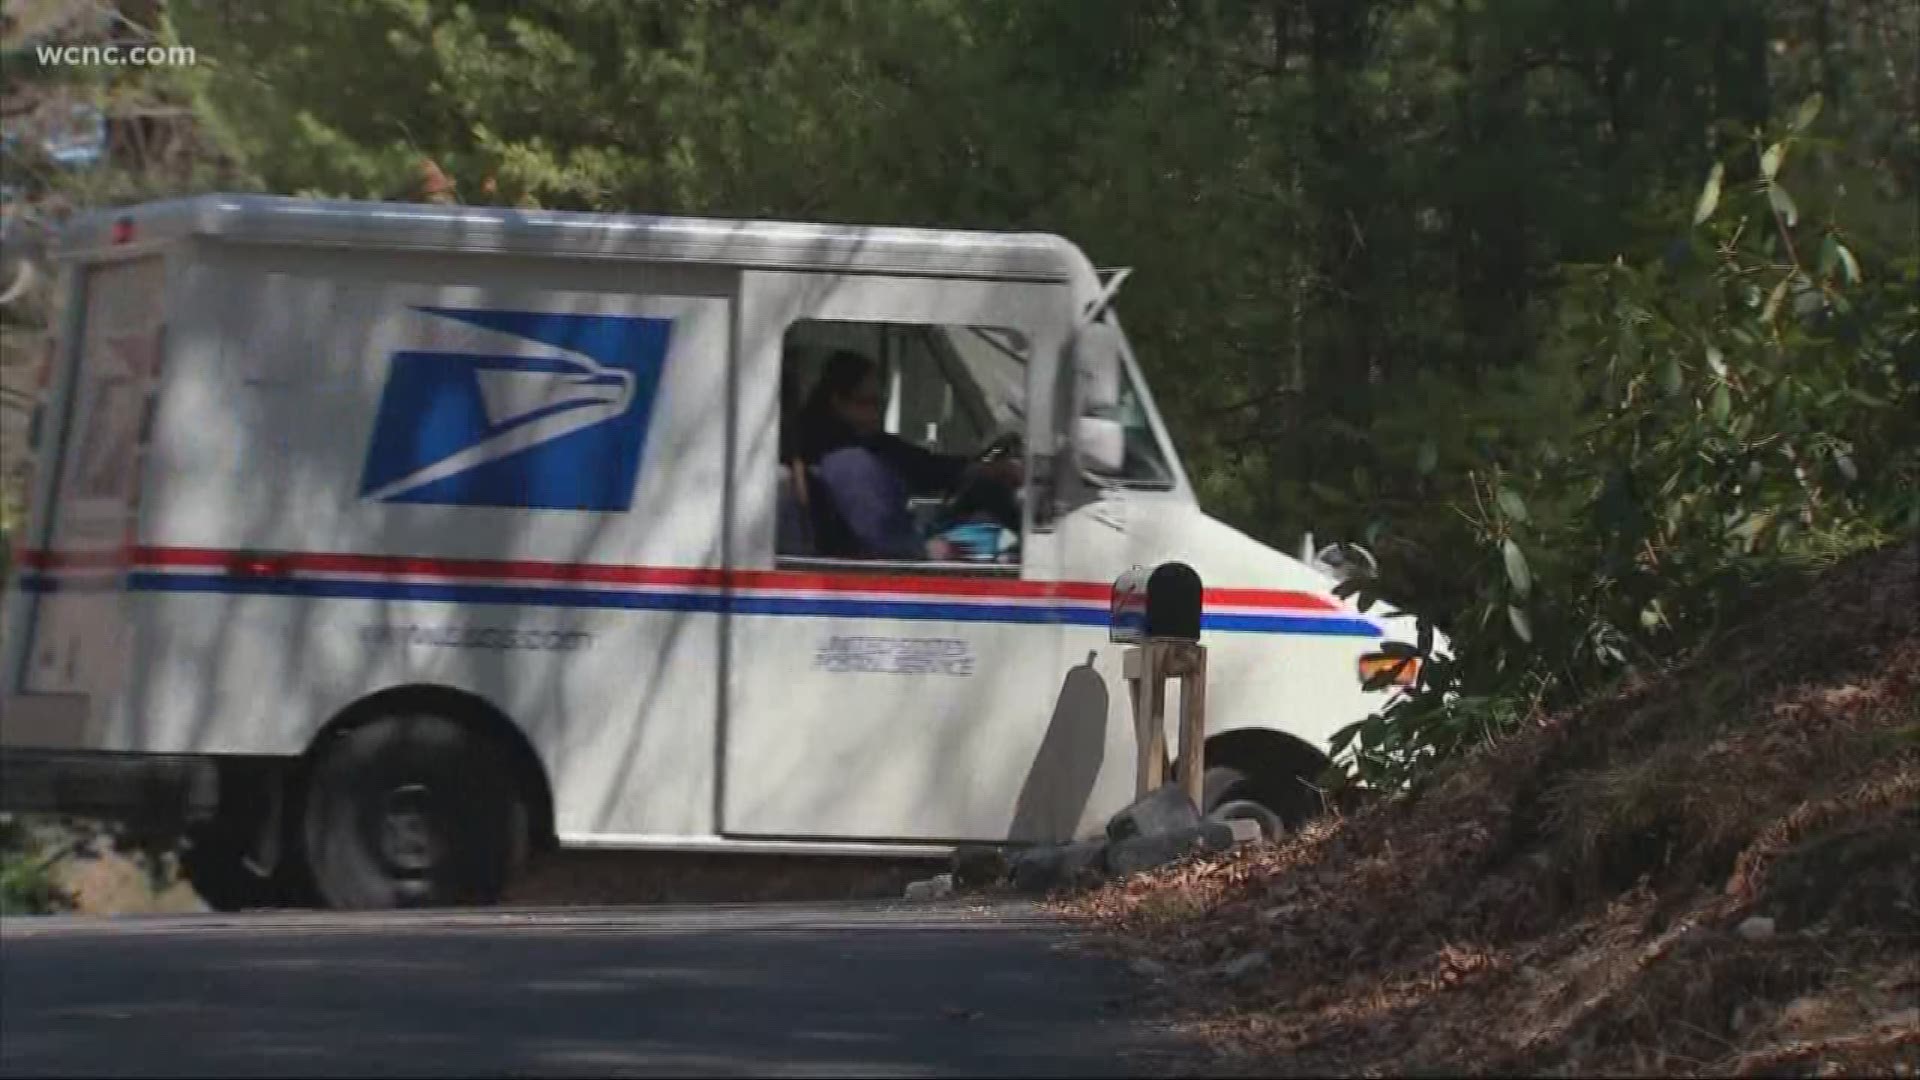 Some drivers are finding themselves on Santa's naughty list. From throwing packages to one Charlotte family who says a package arrived with a bottle of urine inside it.